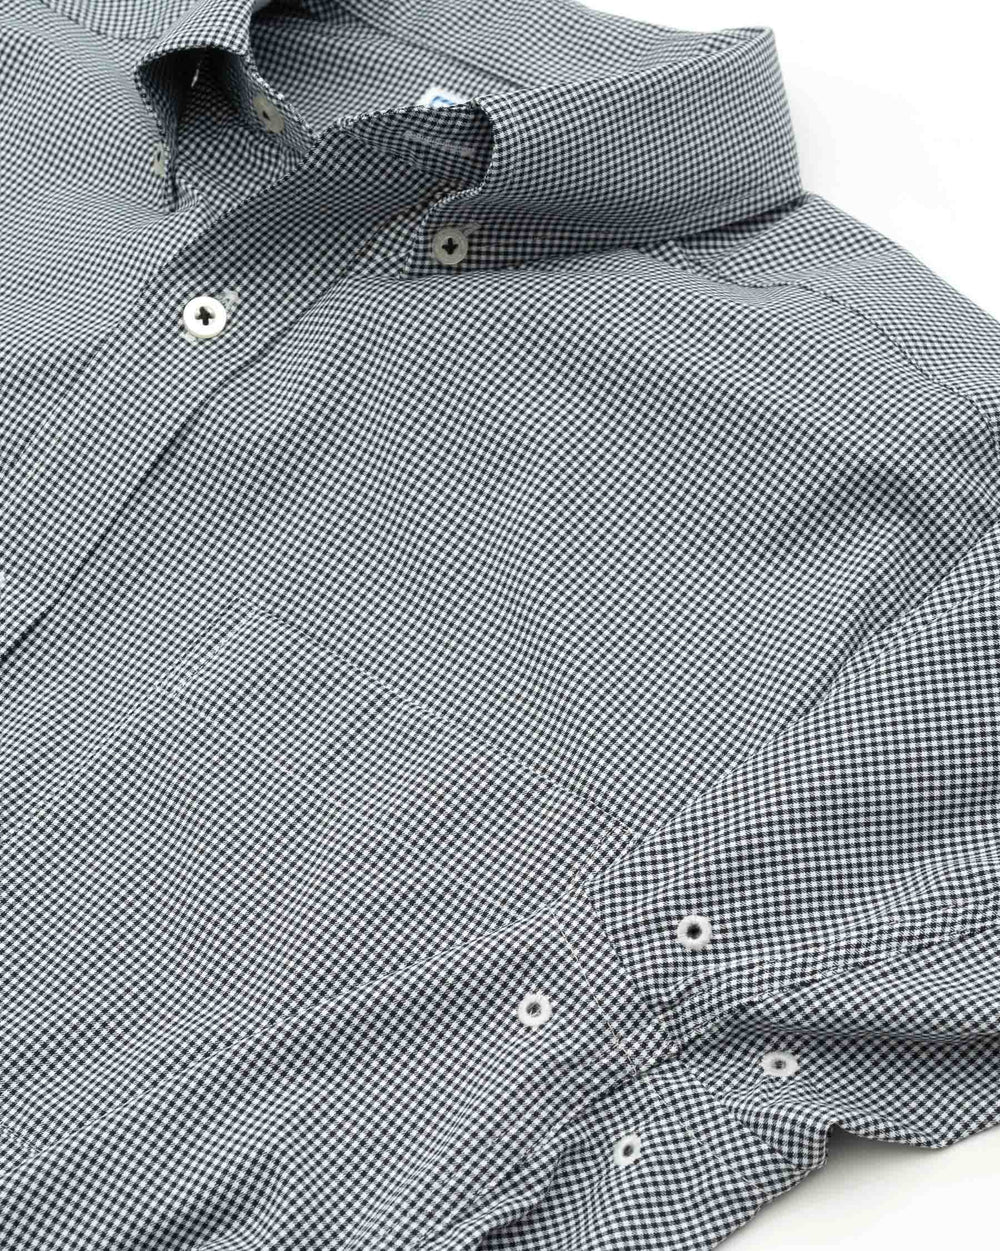 Arm vents of the Men's Black Baylor Gingham Button Down Shirt by Southern Tide - Black